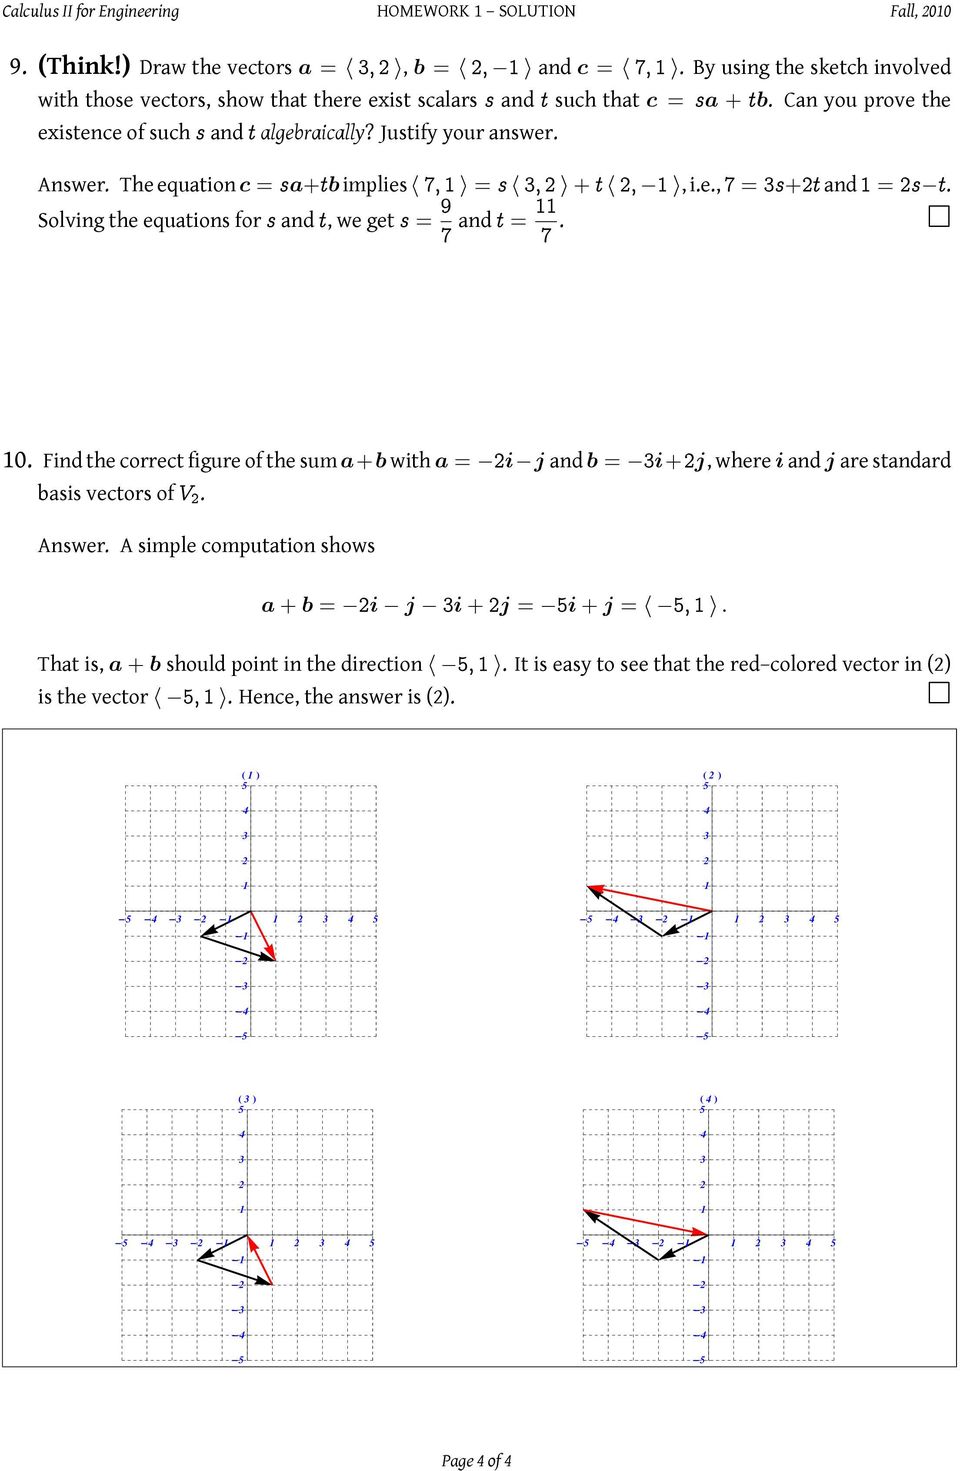 United Arab Emirates University College Of Sciences Department Of Mathematical Sciences Homework 1 Solution Section 10 1 Vectors In The Plane Pdf Free Download